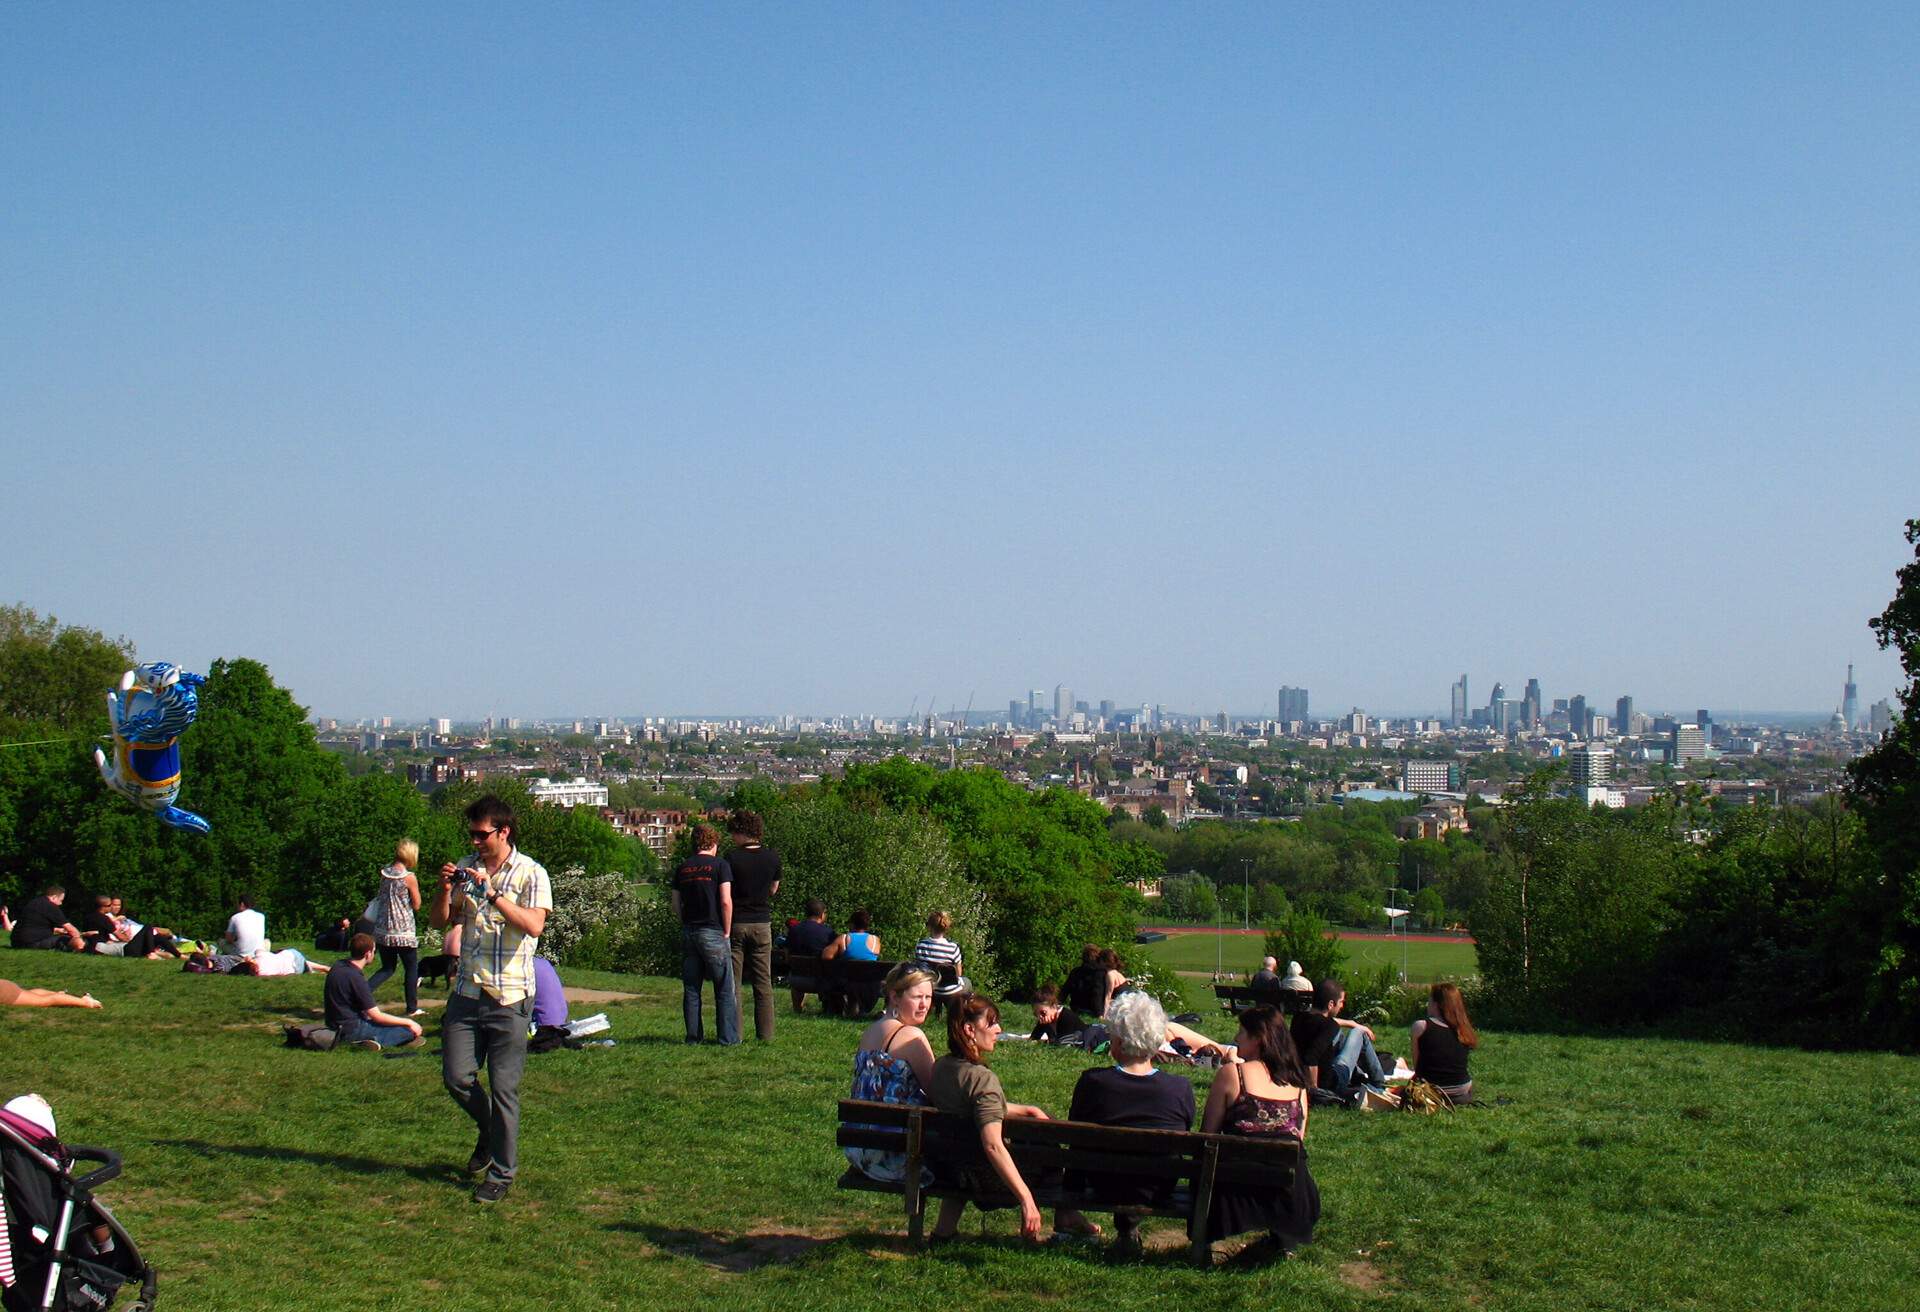 People enjoying a summer afternoon, and the view to the London City skyline, on Parliament Hill in Hampstead Heath, a large  park in Hampstead, London, England, United Kingdom.